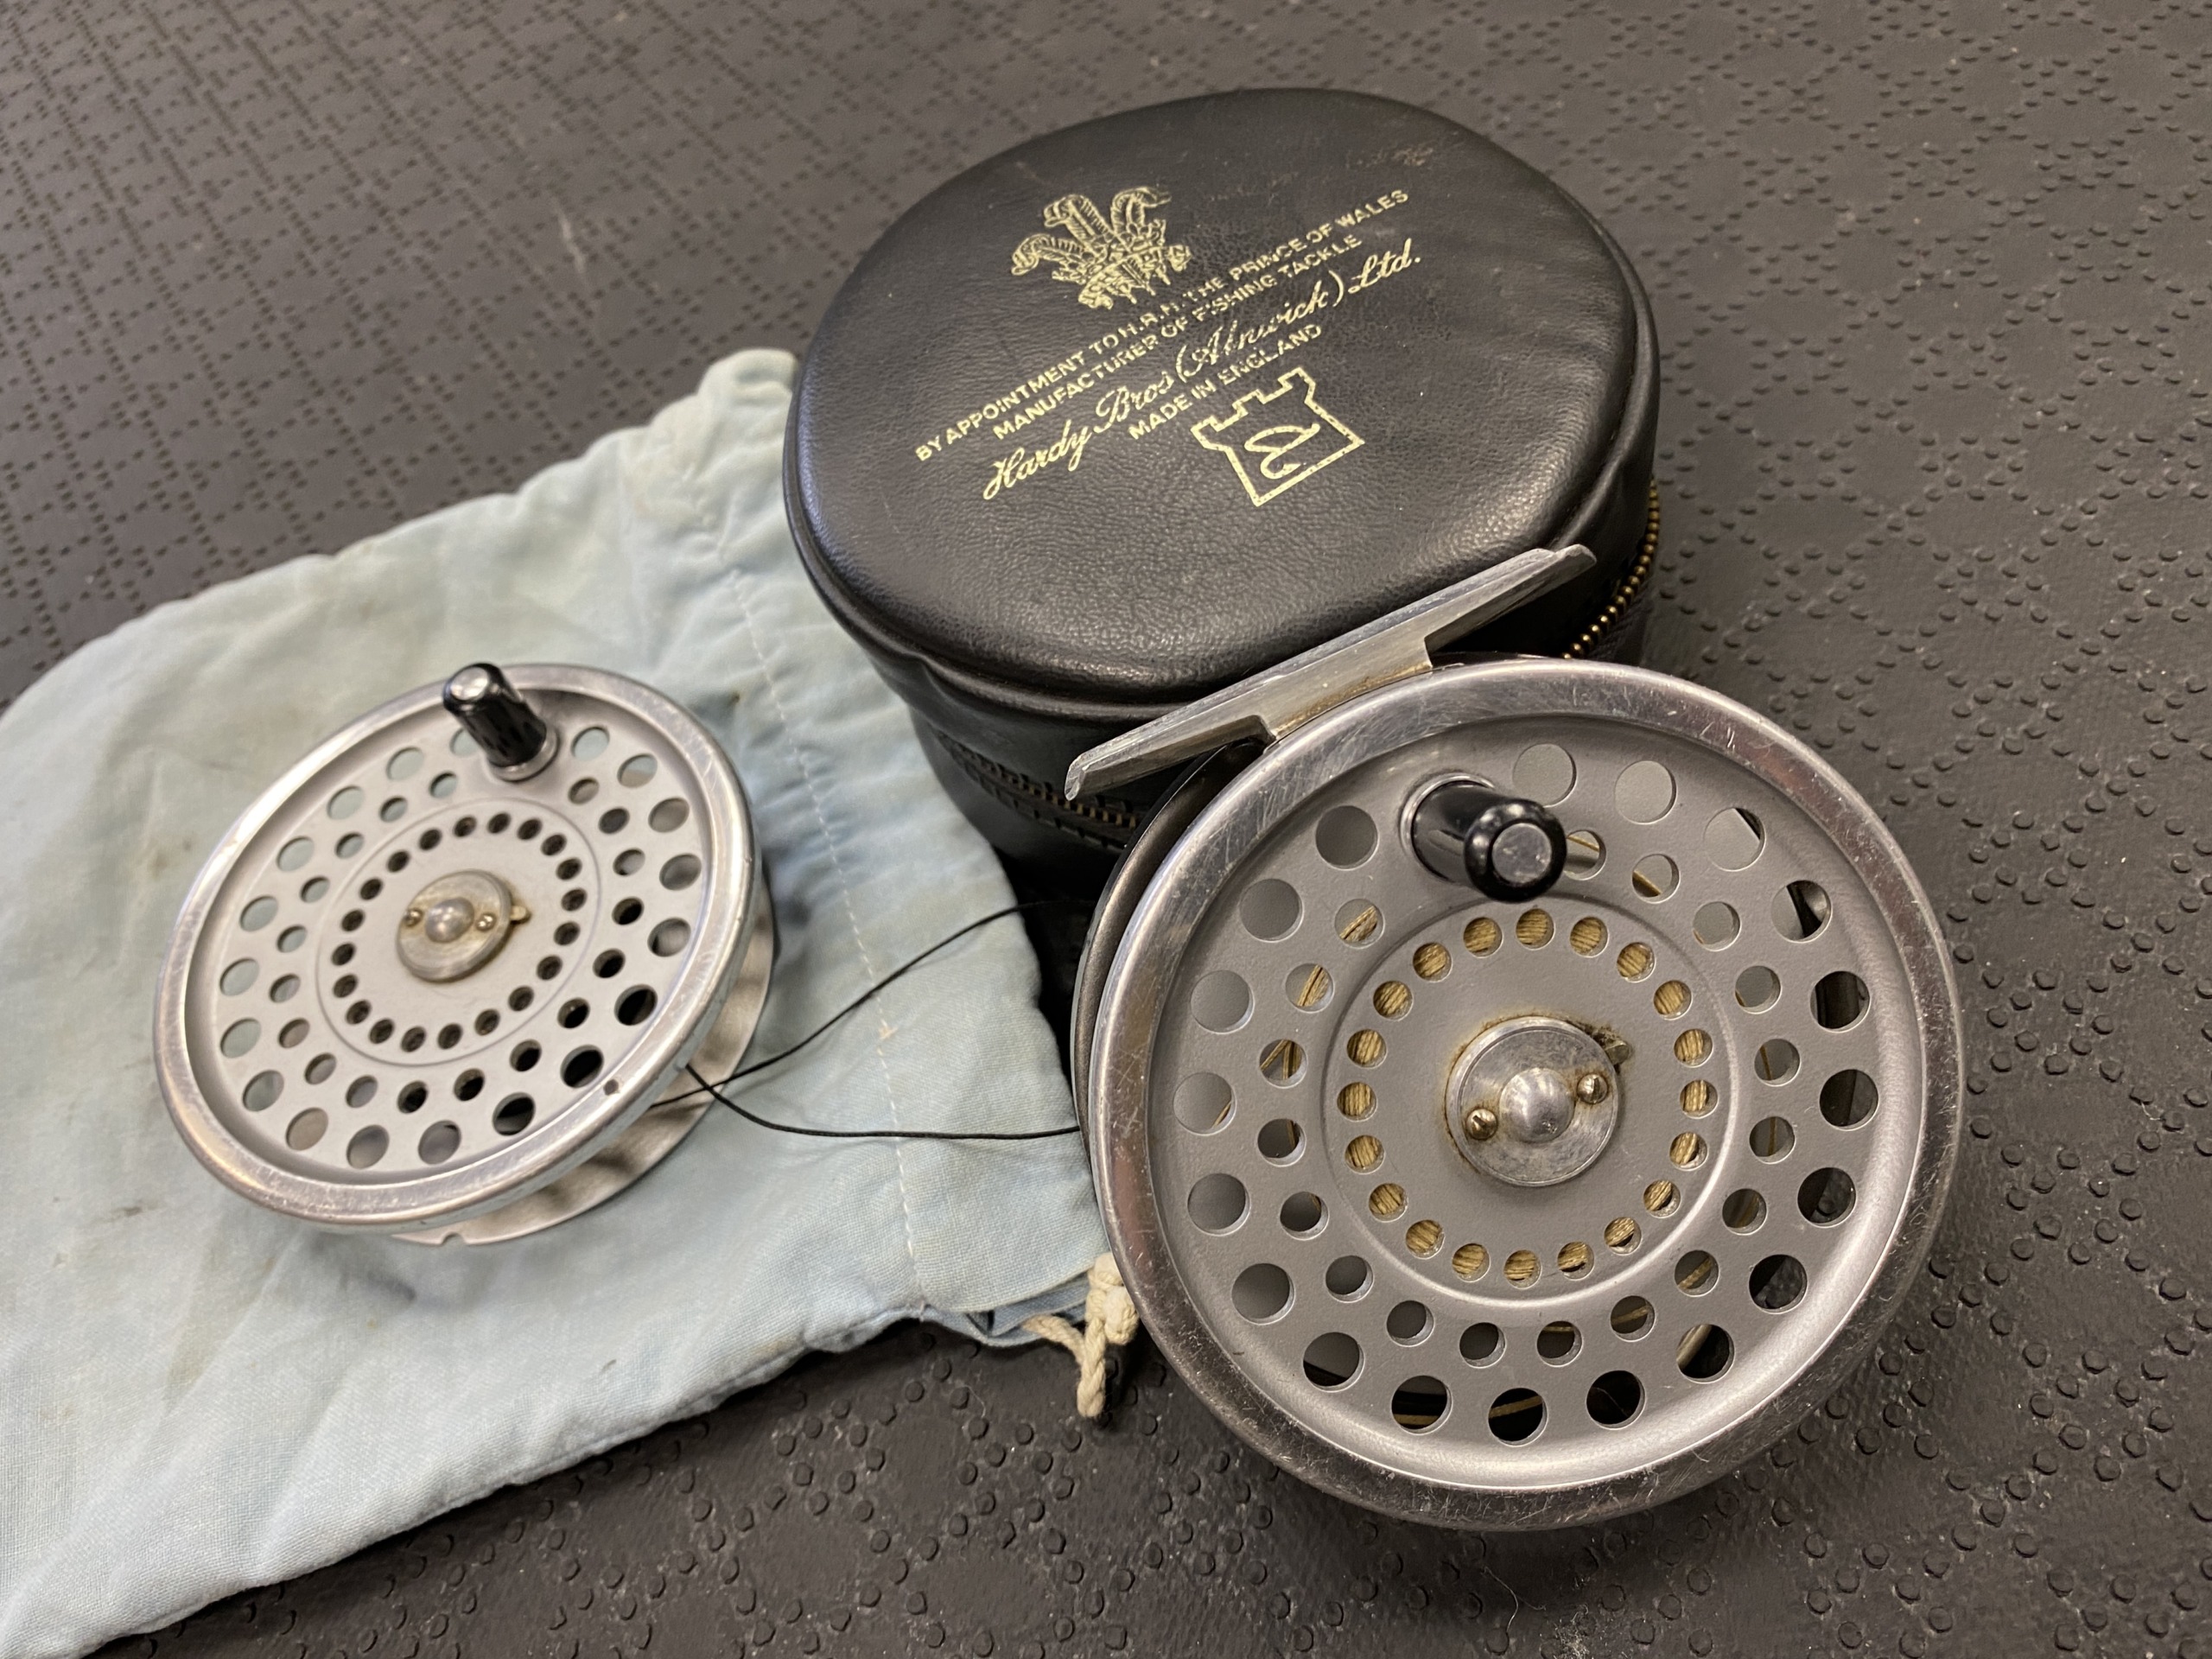 Hardy Marquis 8/9 Fly Reel - Made in England C/W Spare Spool & Case - GOOD CONDITION! - $150